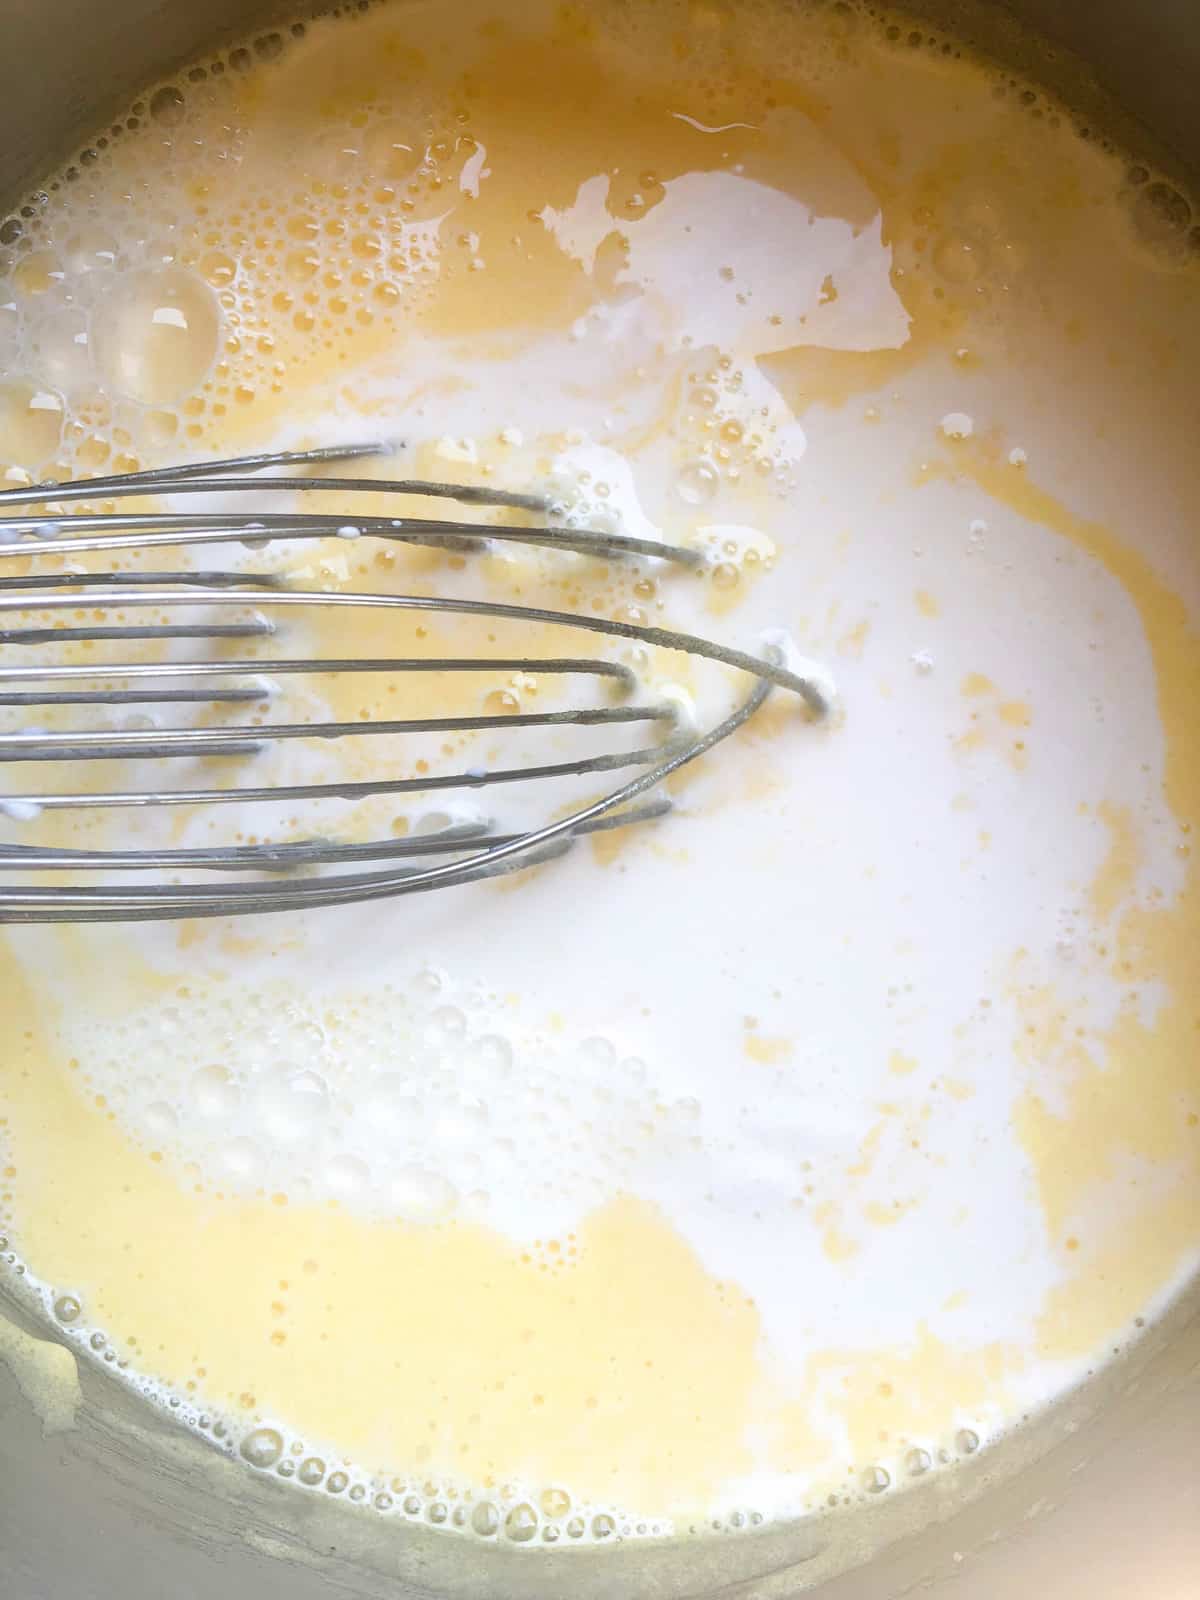 In a large saucepan, mix the egg yolks with the sugar and whisk over medium heat until thickened.